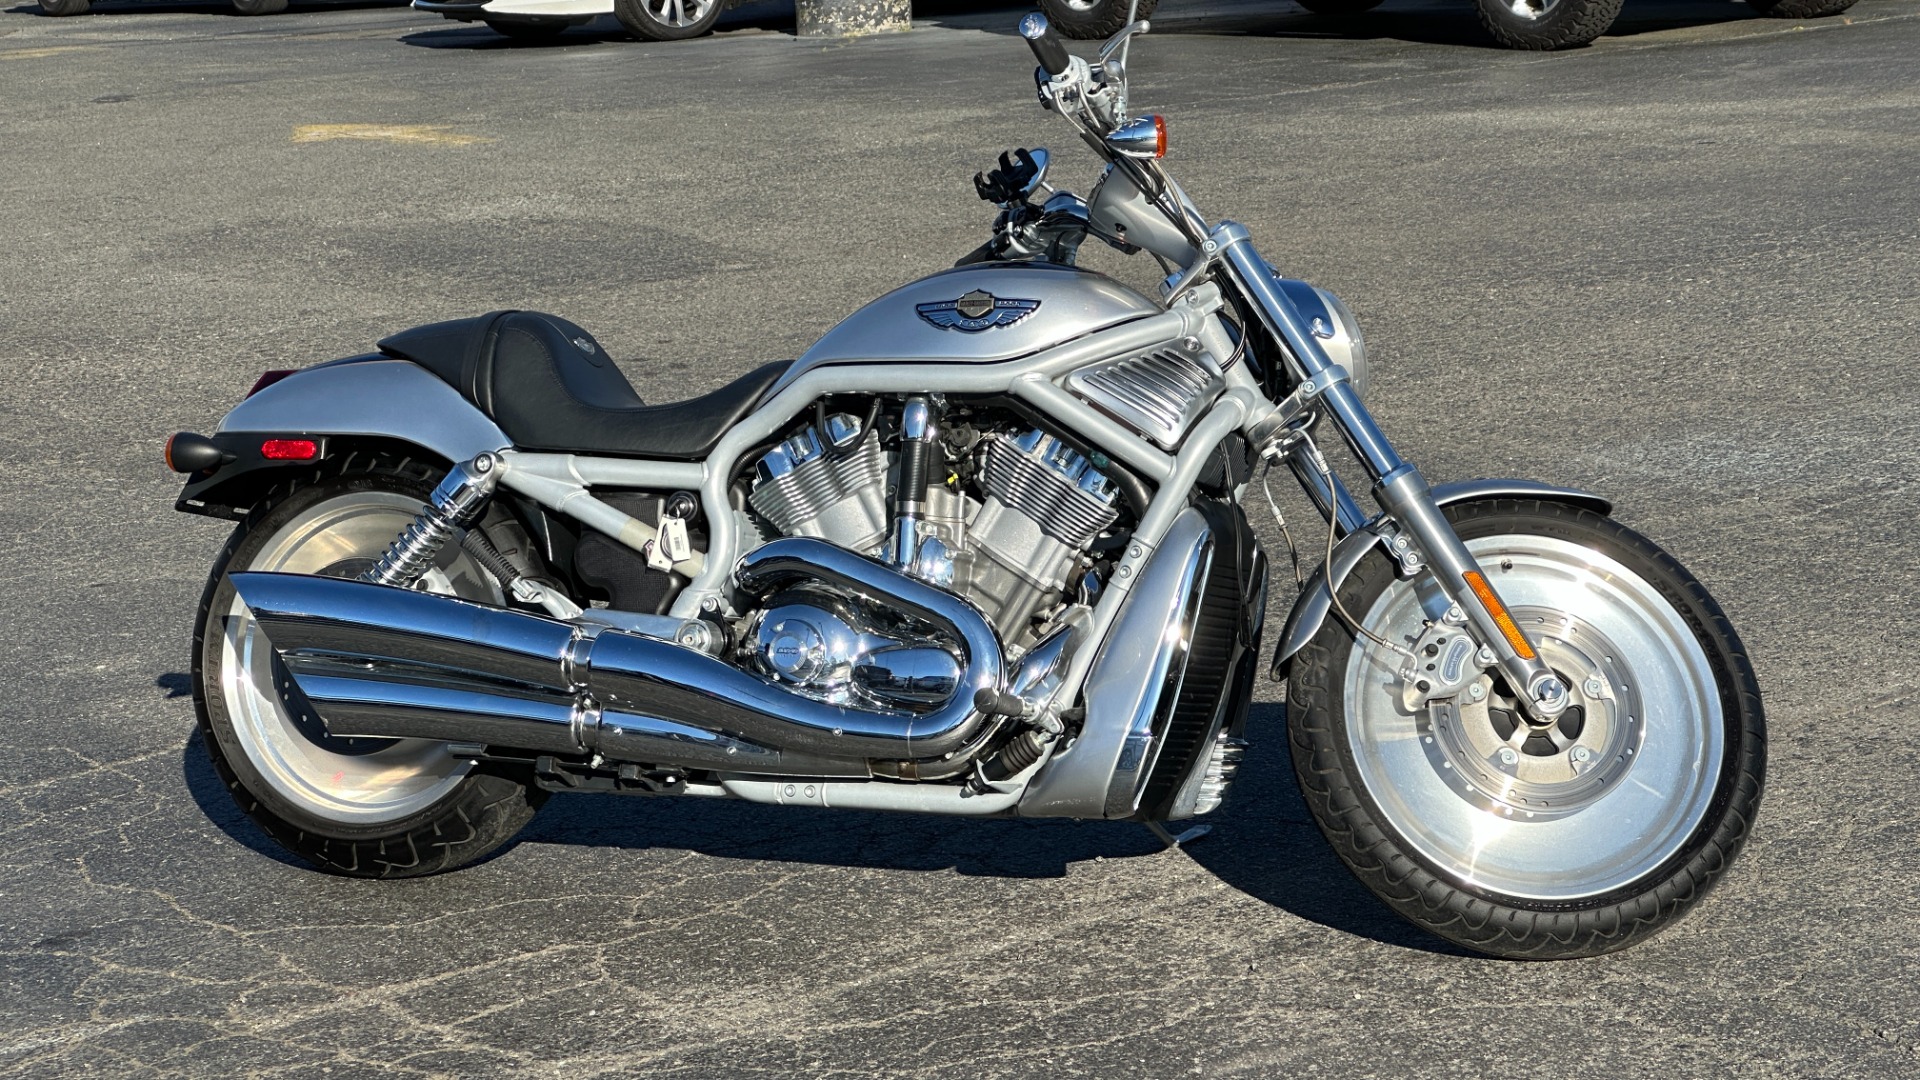 Used 2003 Harley Davidson V Rod ANNIVERSARY EDITION / 1130CC ENGINE / BREMBO BRAKES / VORTEX AIR SCOOPS for sale Sold at Formula Imports in Charlotte NC 28227 61